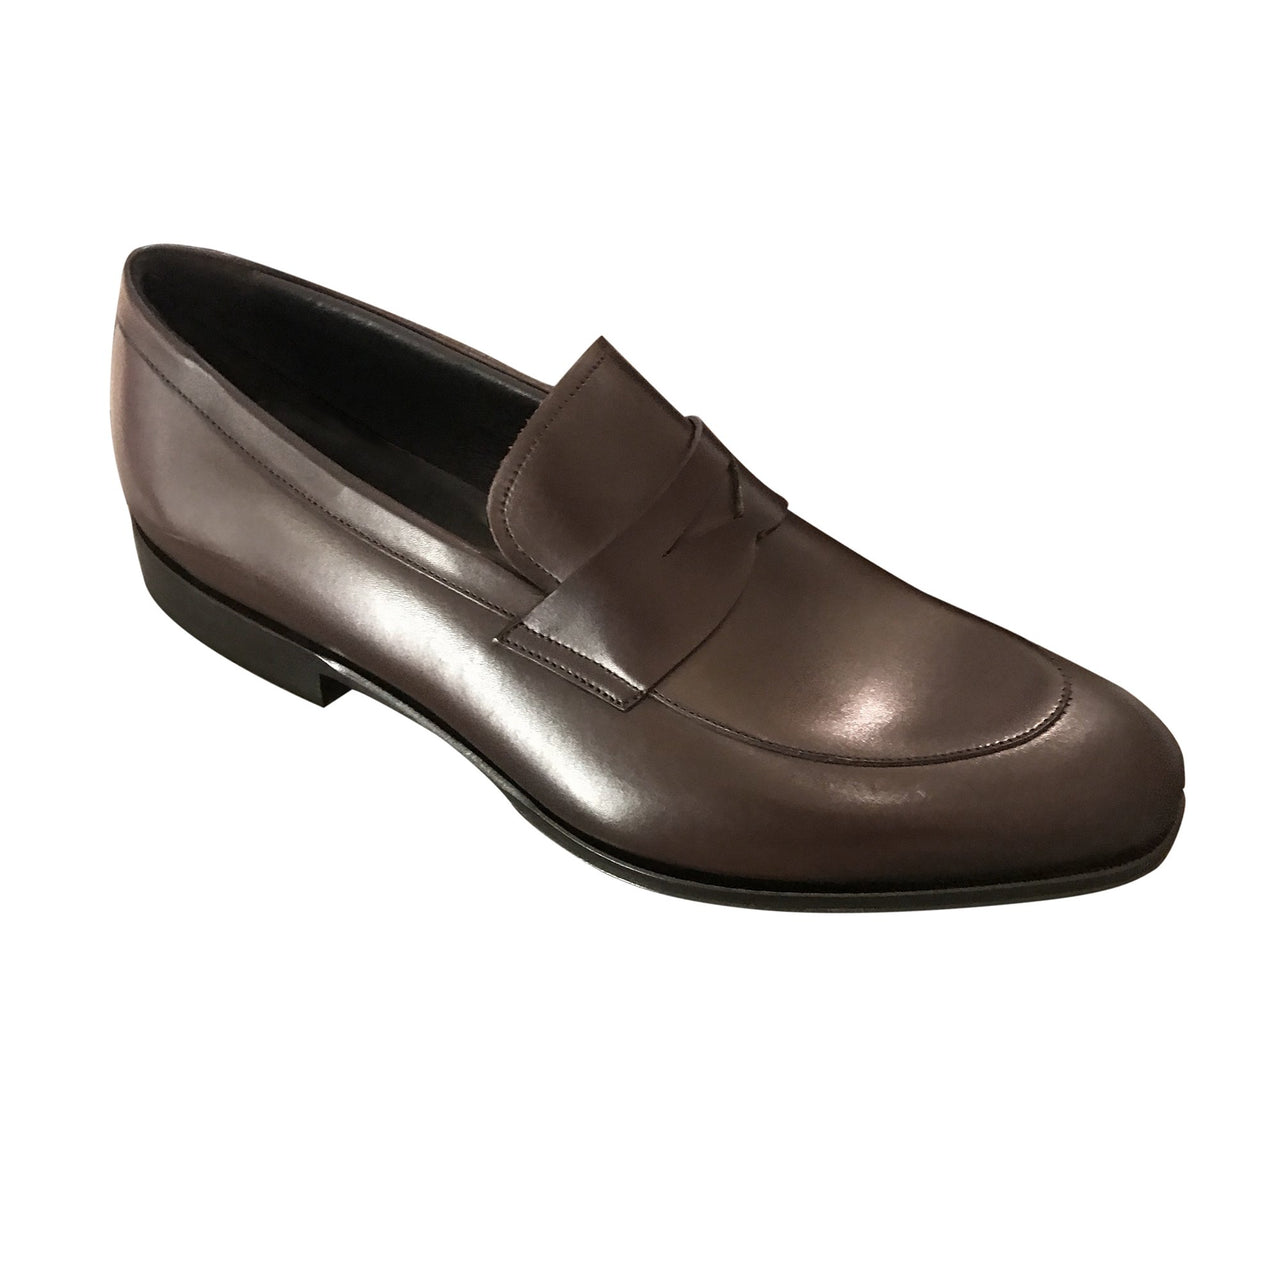 CANALI Calfskin Penny Loafers Shoe DARK BROWN